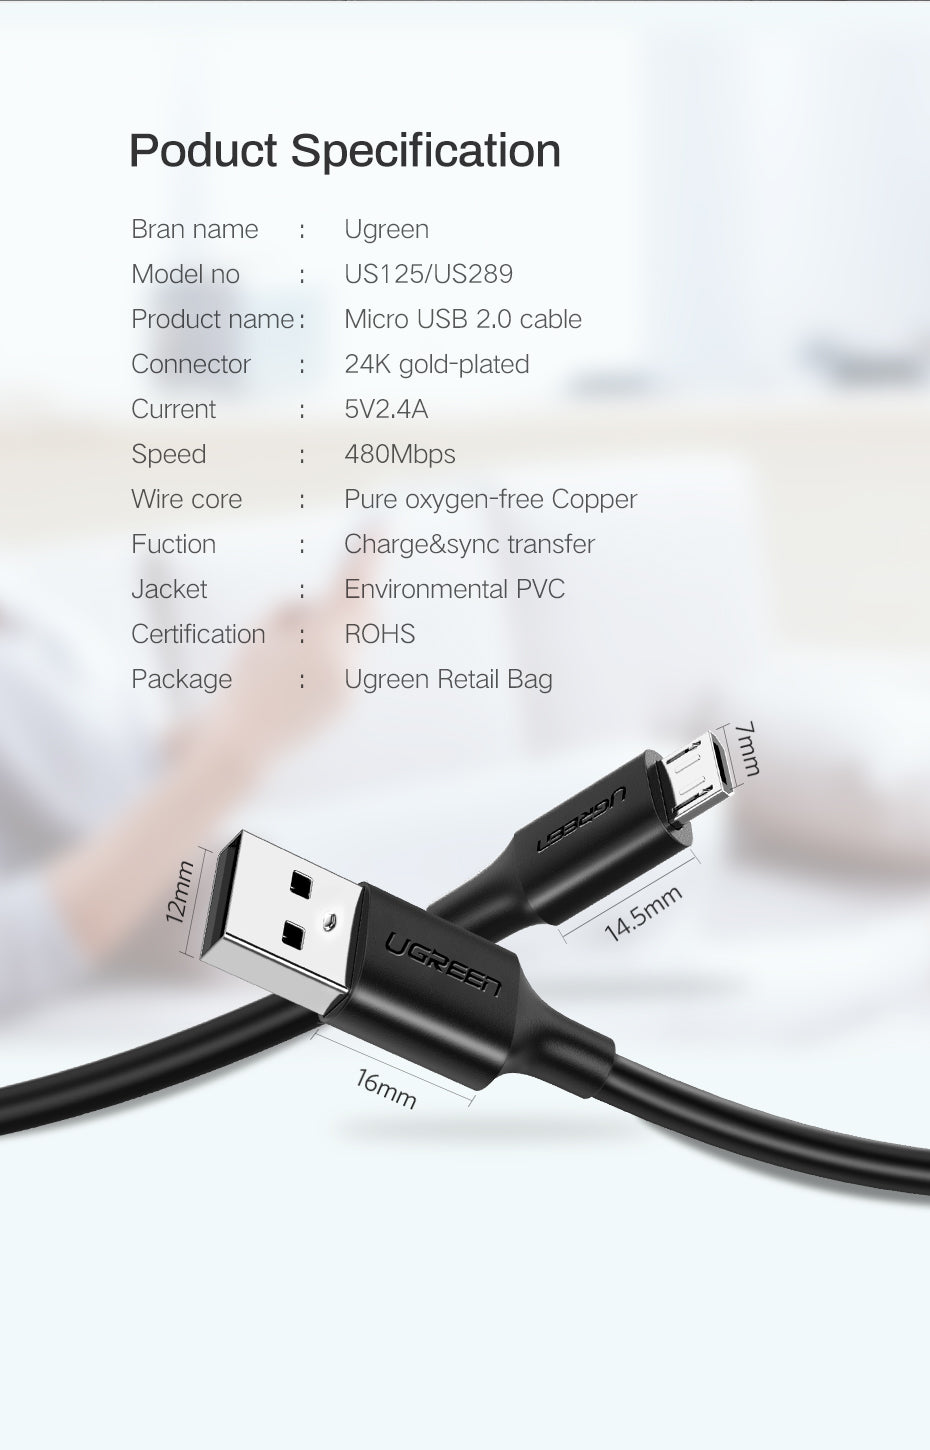 UGREEN USB 2.0A TO MICRO USB CABLE  NICKEL PLATING 1M - White